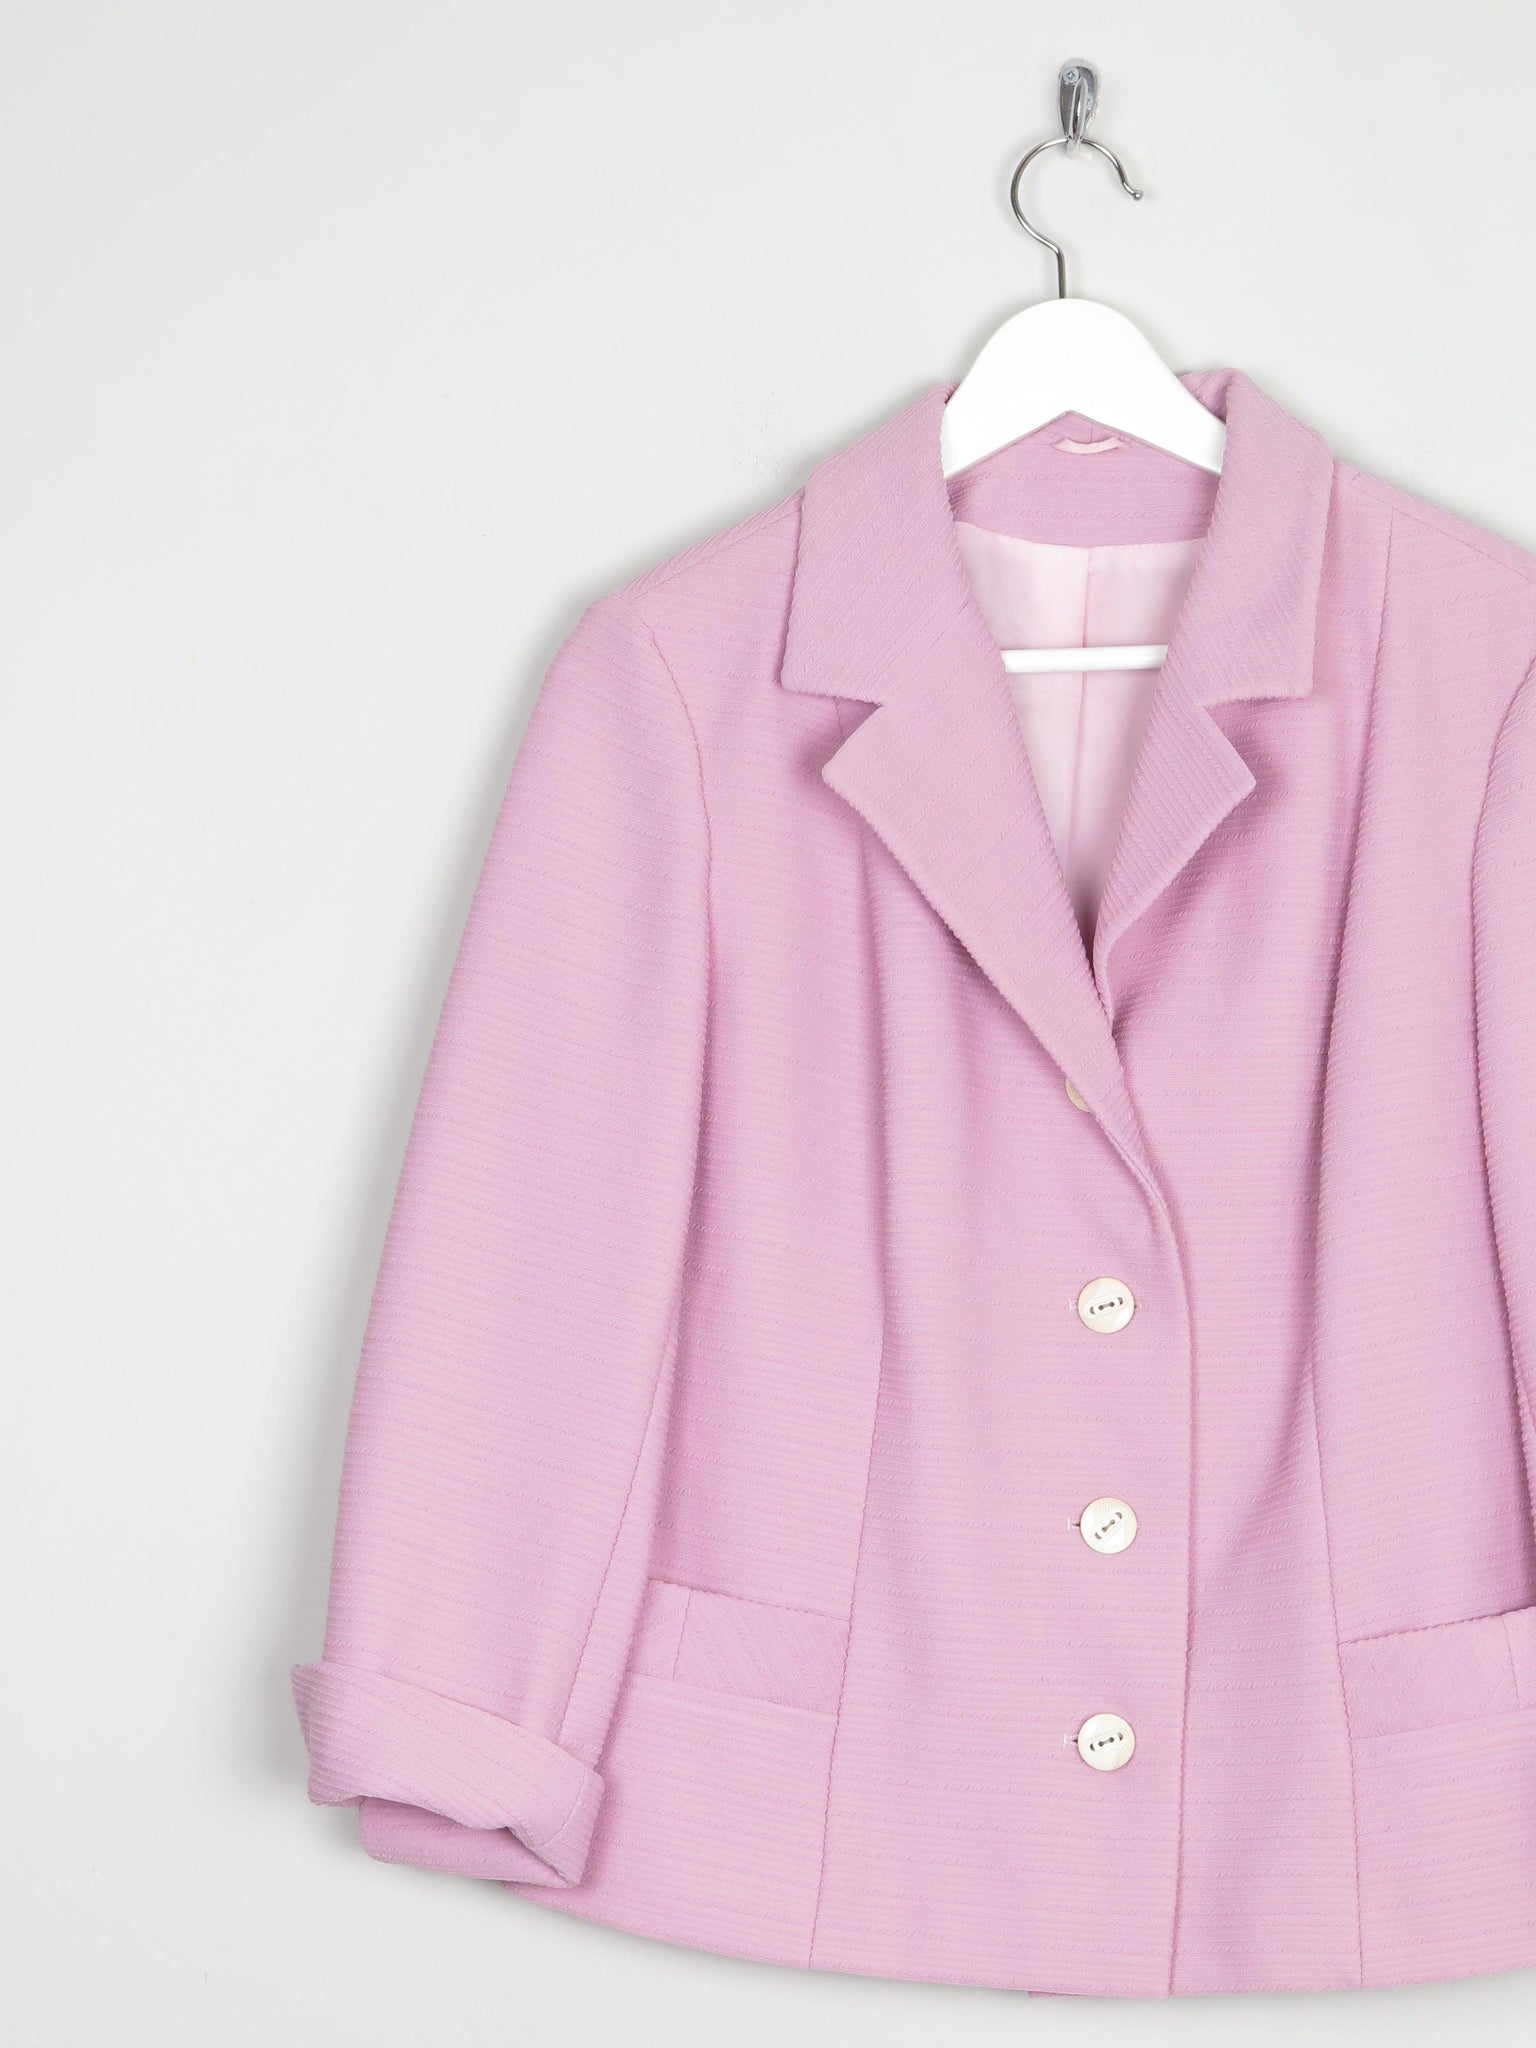 Women’s Candy Pink 1960s Jacket 12/14 - The Harlequin